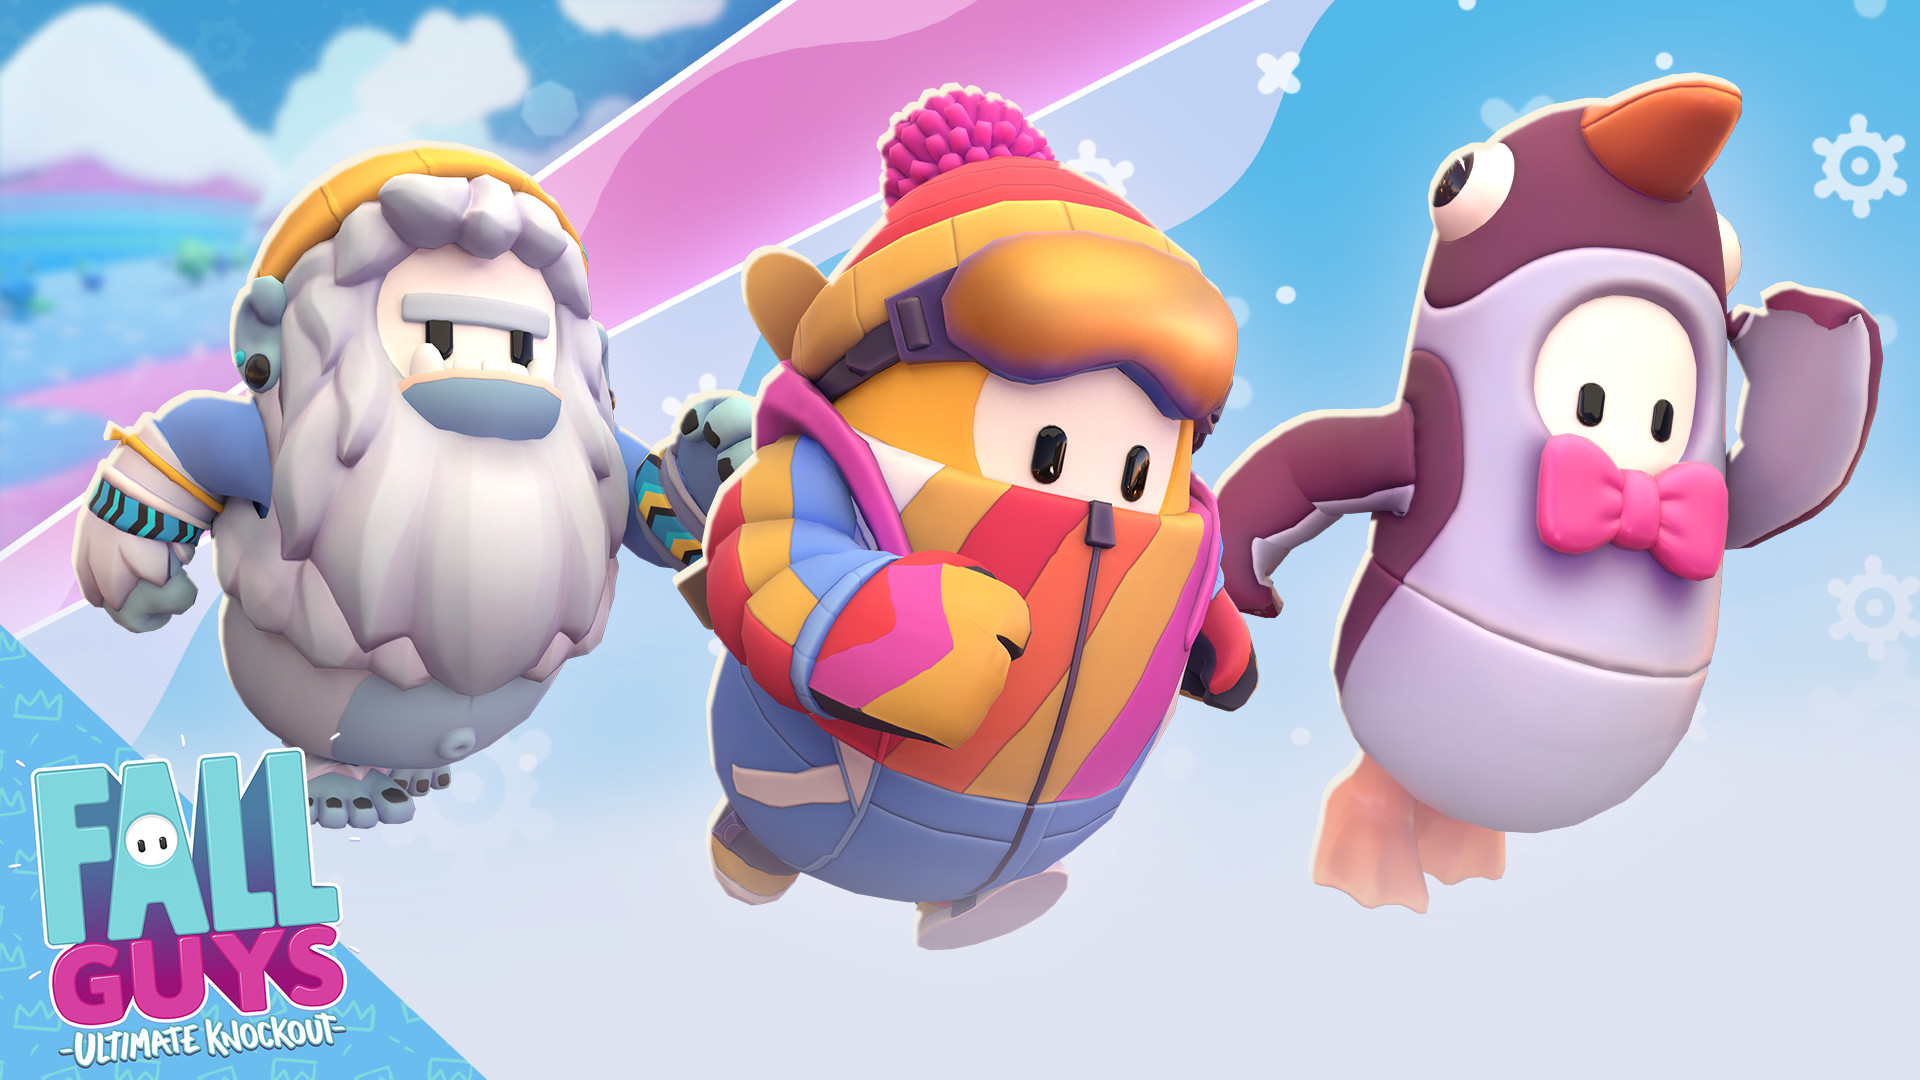 Fall Guys - Icy Adventure Pack Featured Screenshot #1